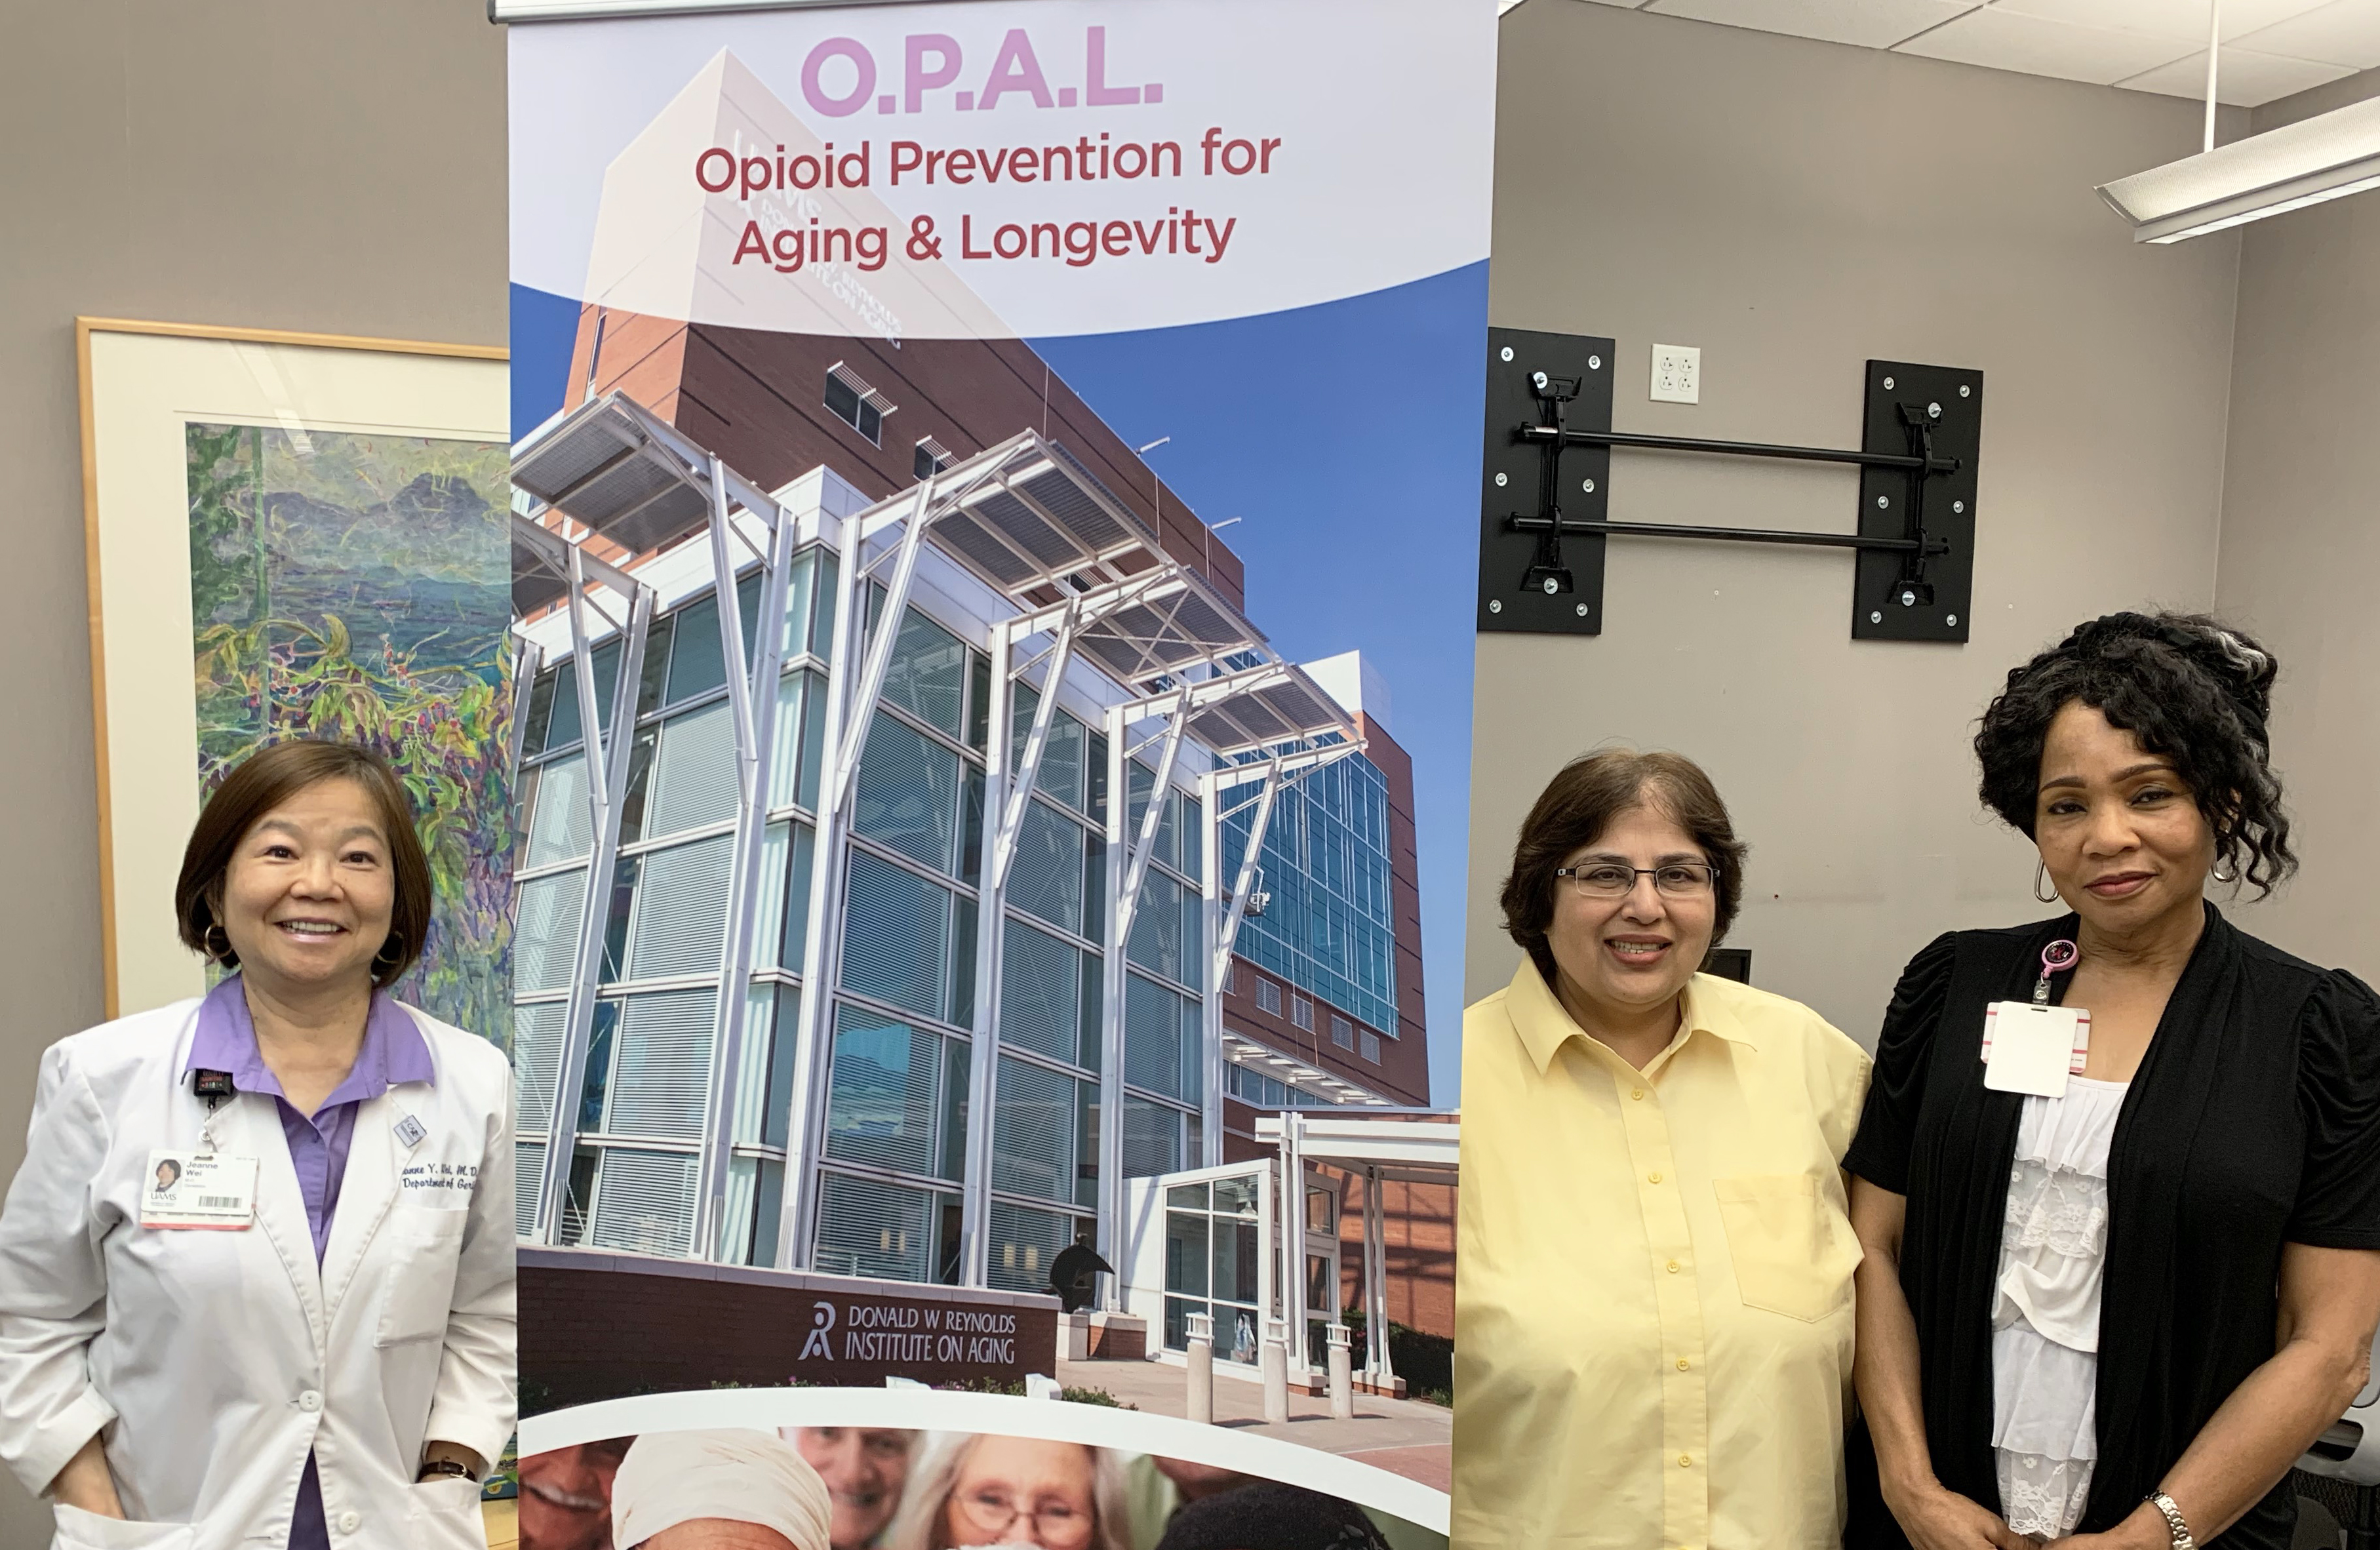 The new Opioid Prevention for Aging & Longevity program at the UAMS Reynolds Institute on Aging is led by Jeanne Wei, M.D., Ph.D., left, along with Gohar Azhar, M.D., and Regina Gibson, Ph.D.